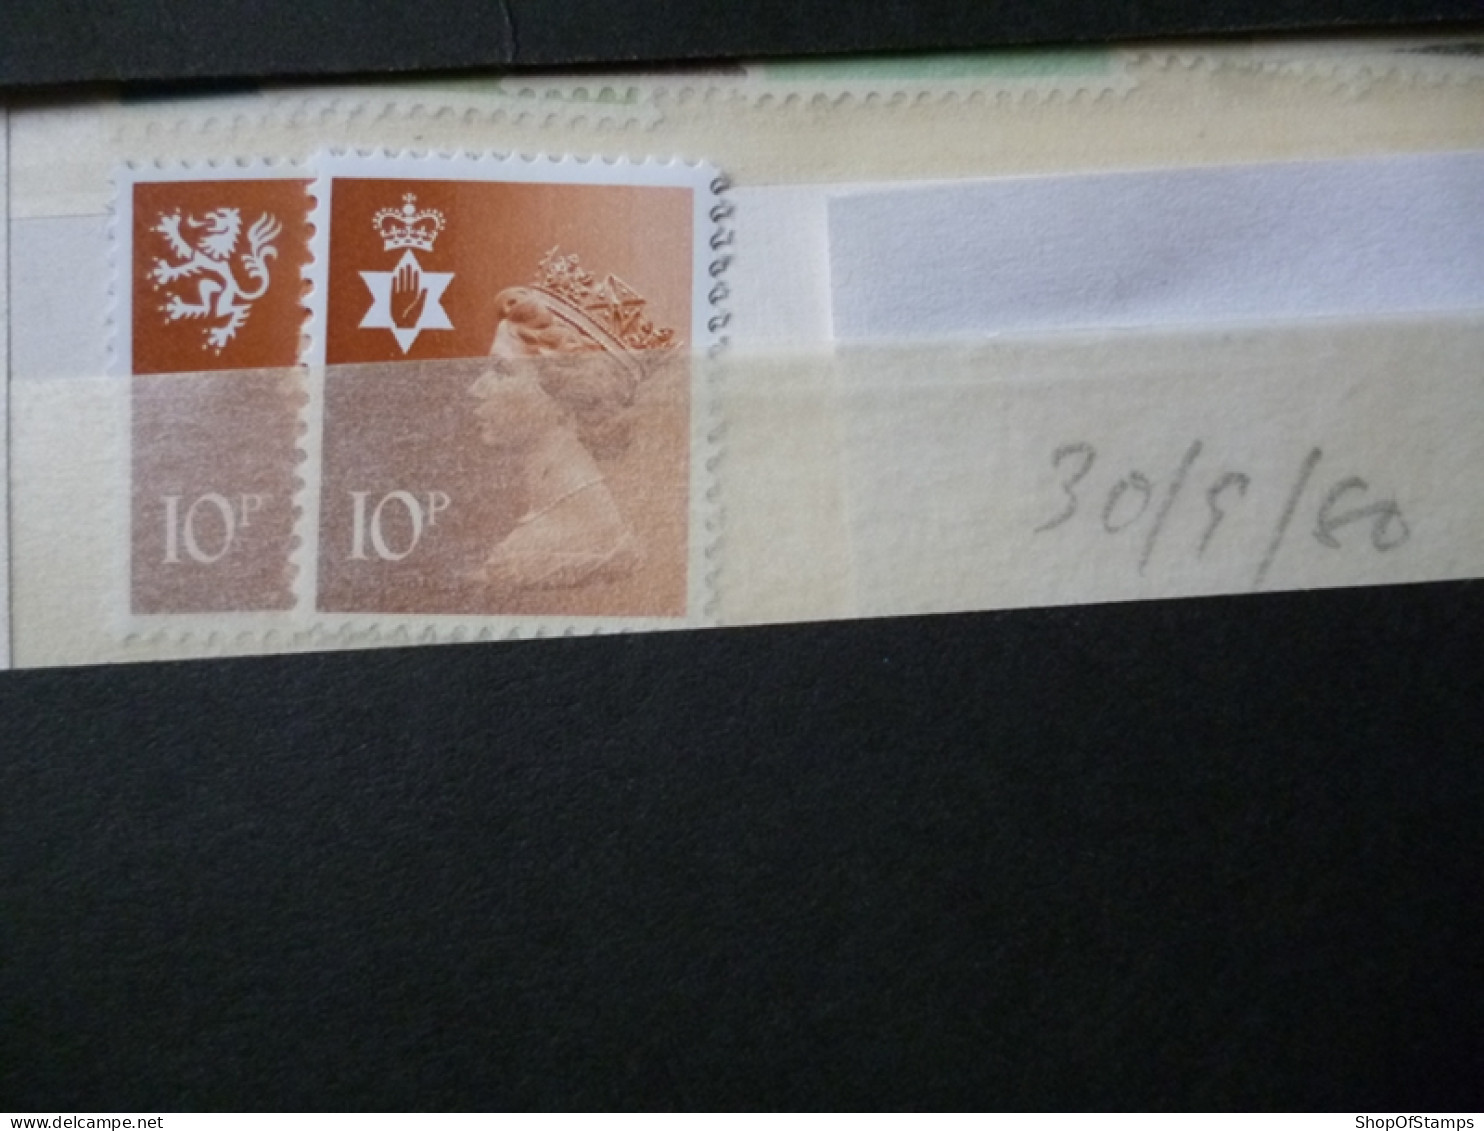 GREAT BRITAIN SG X 1980 30.9.80  MINT DEFI ISSUE FROM GPO IN ENVELOPE - Machines à Affranchir (EMA)